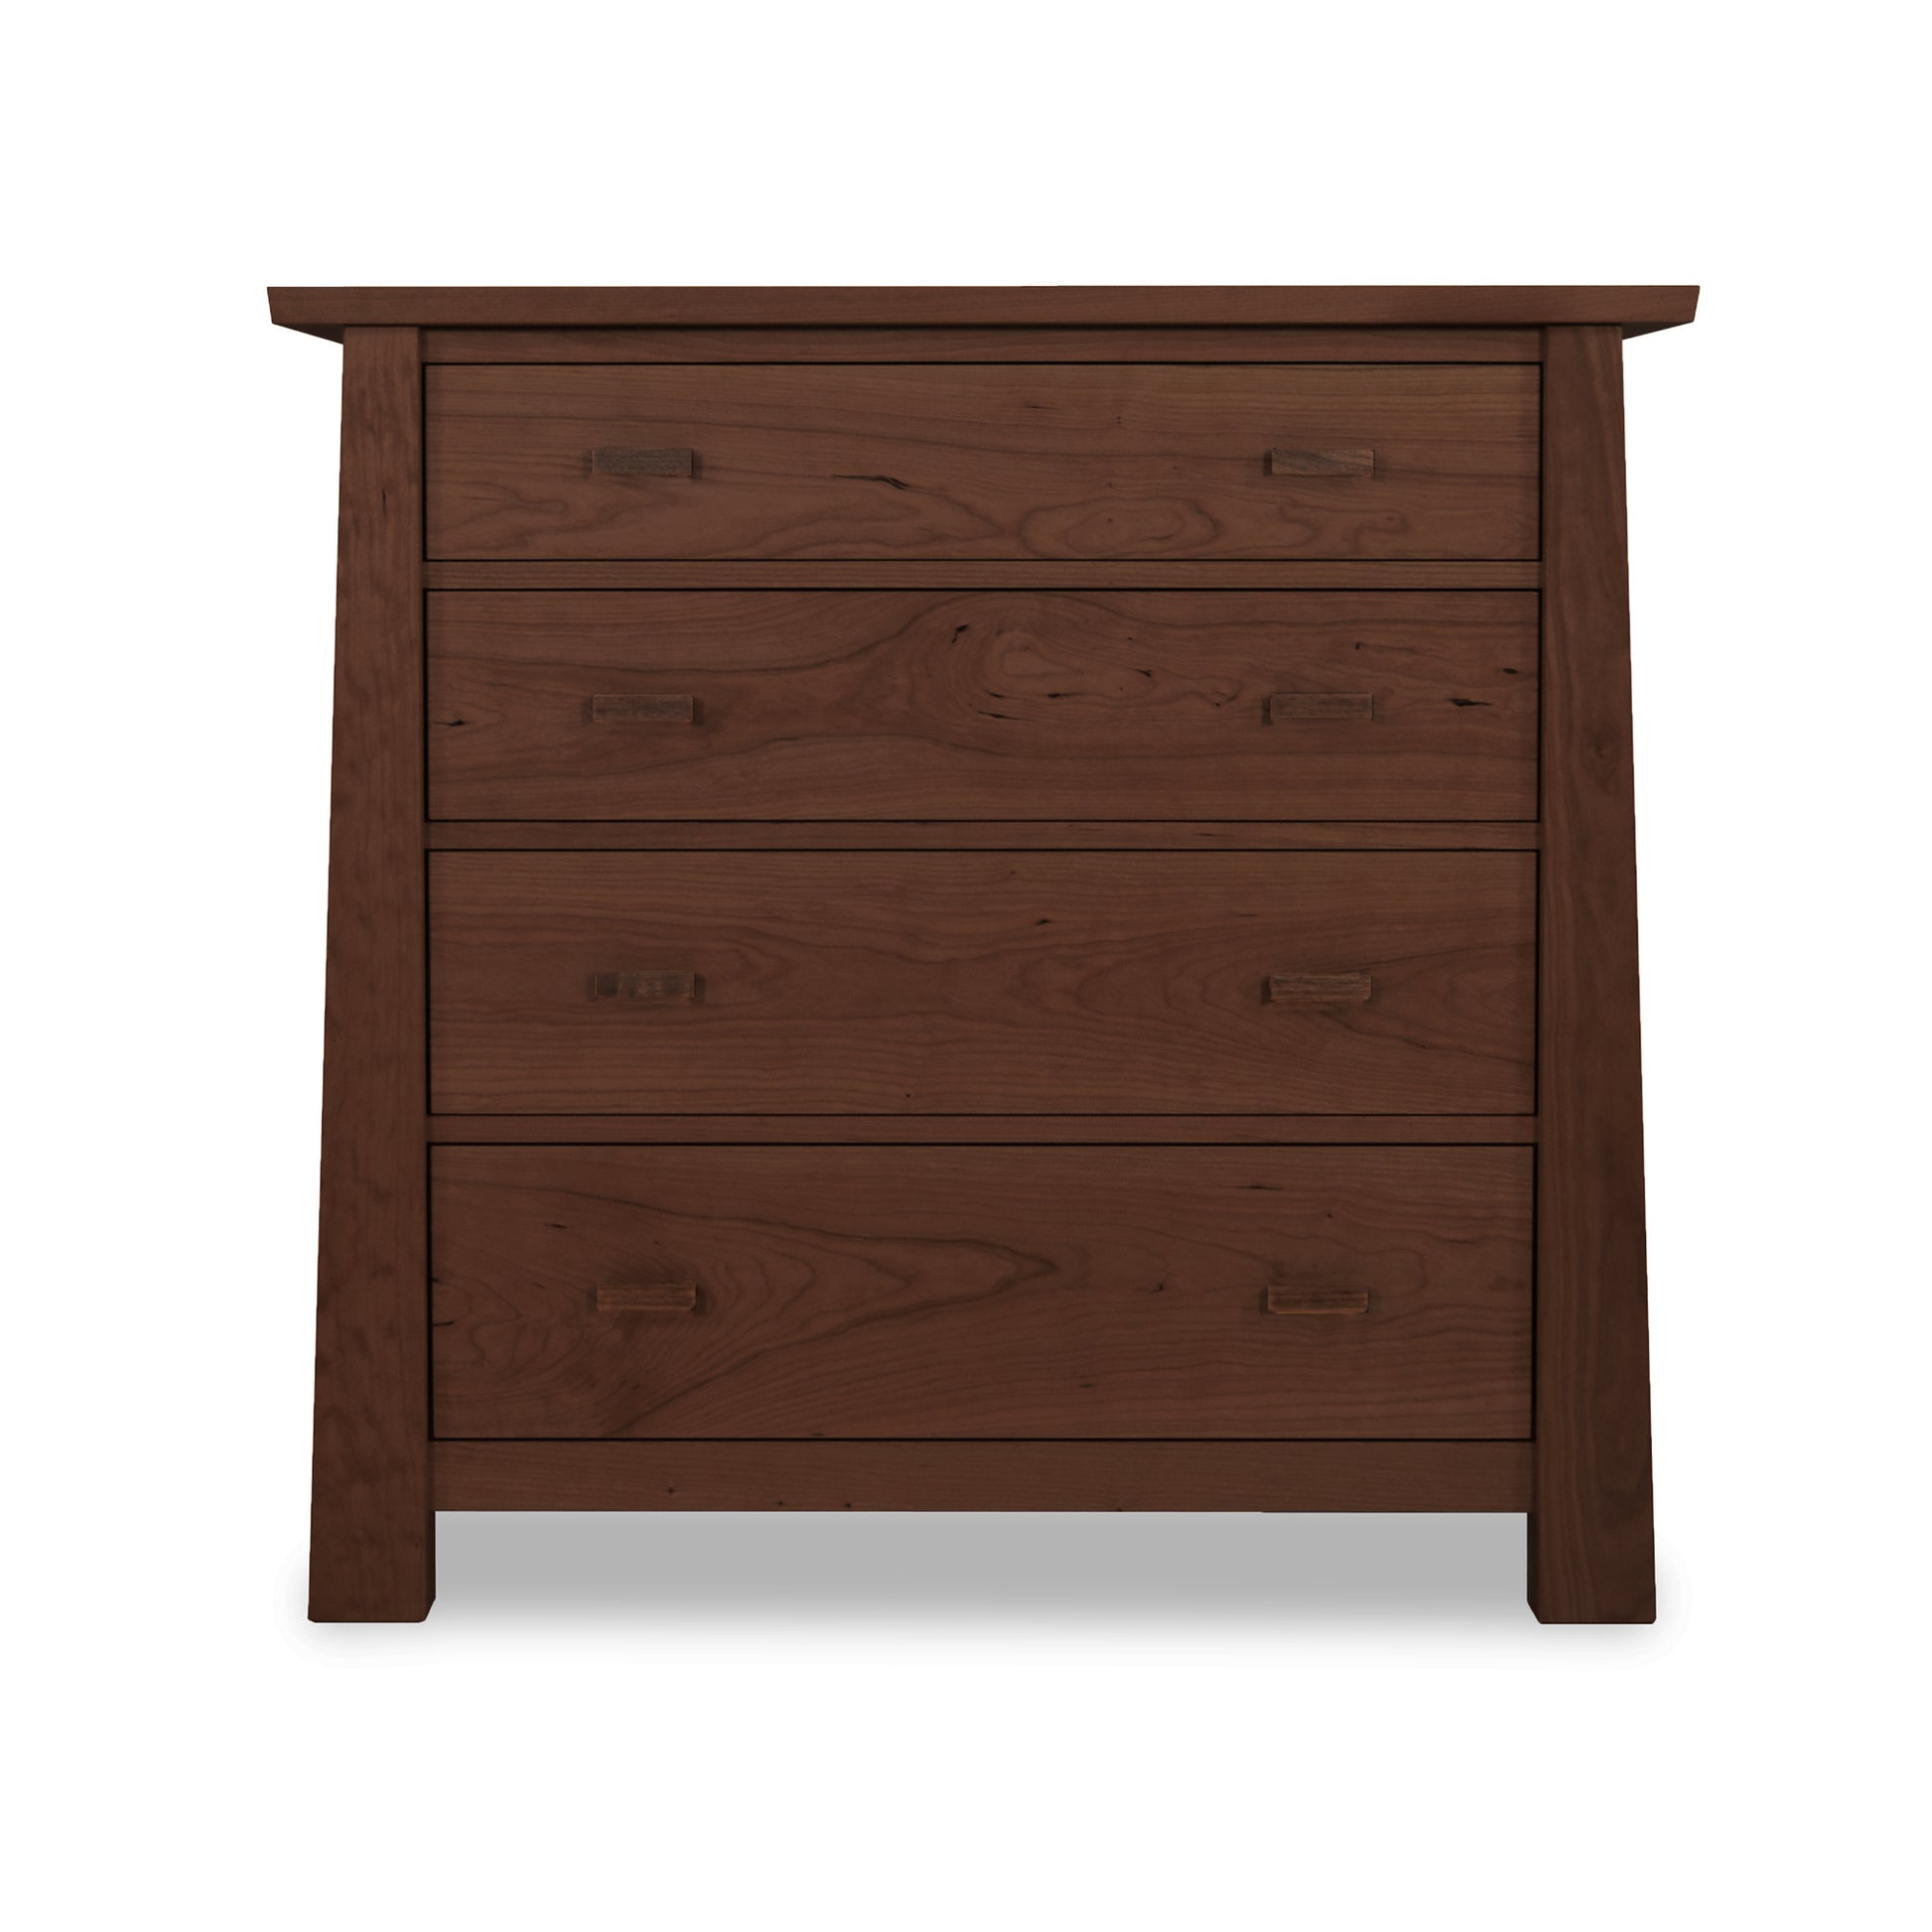 A Gamble 4-Drawer Chest, crafted from sustainably harvested materials by Maple Corner Woodworks, with four drawers each featuring a horizontal handle, against a plain white background.